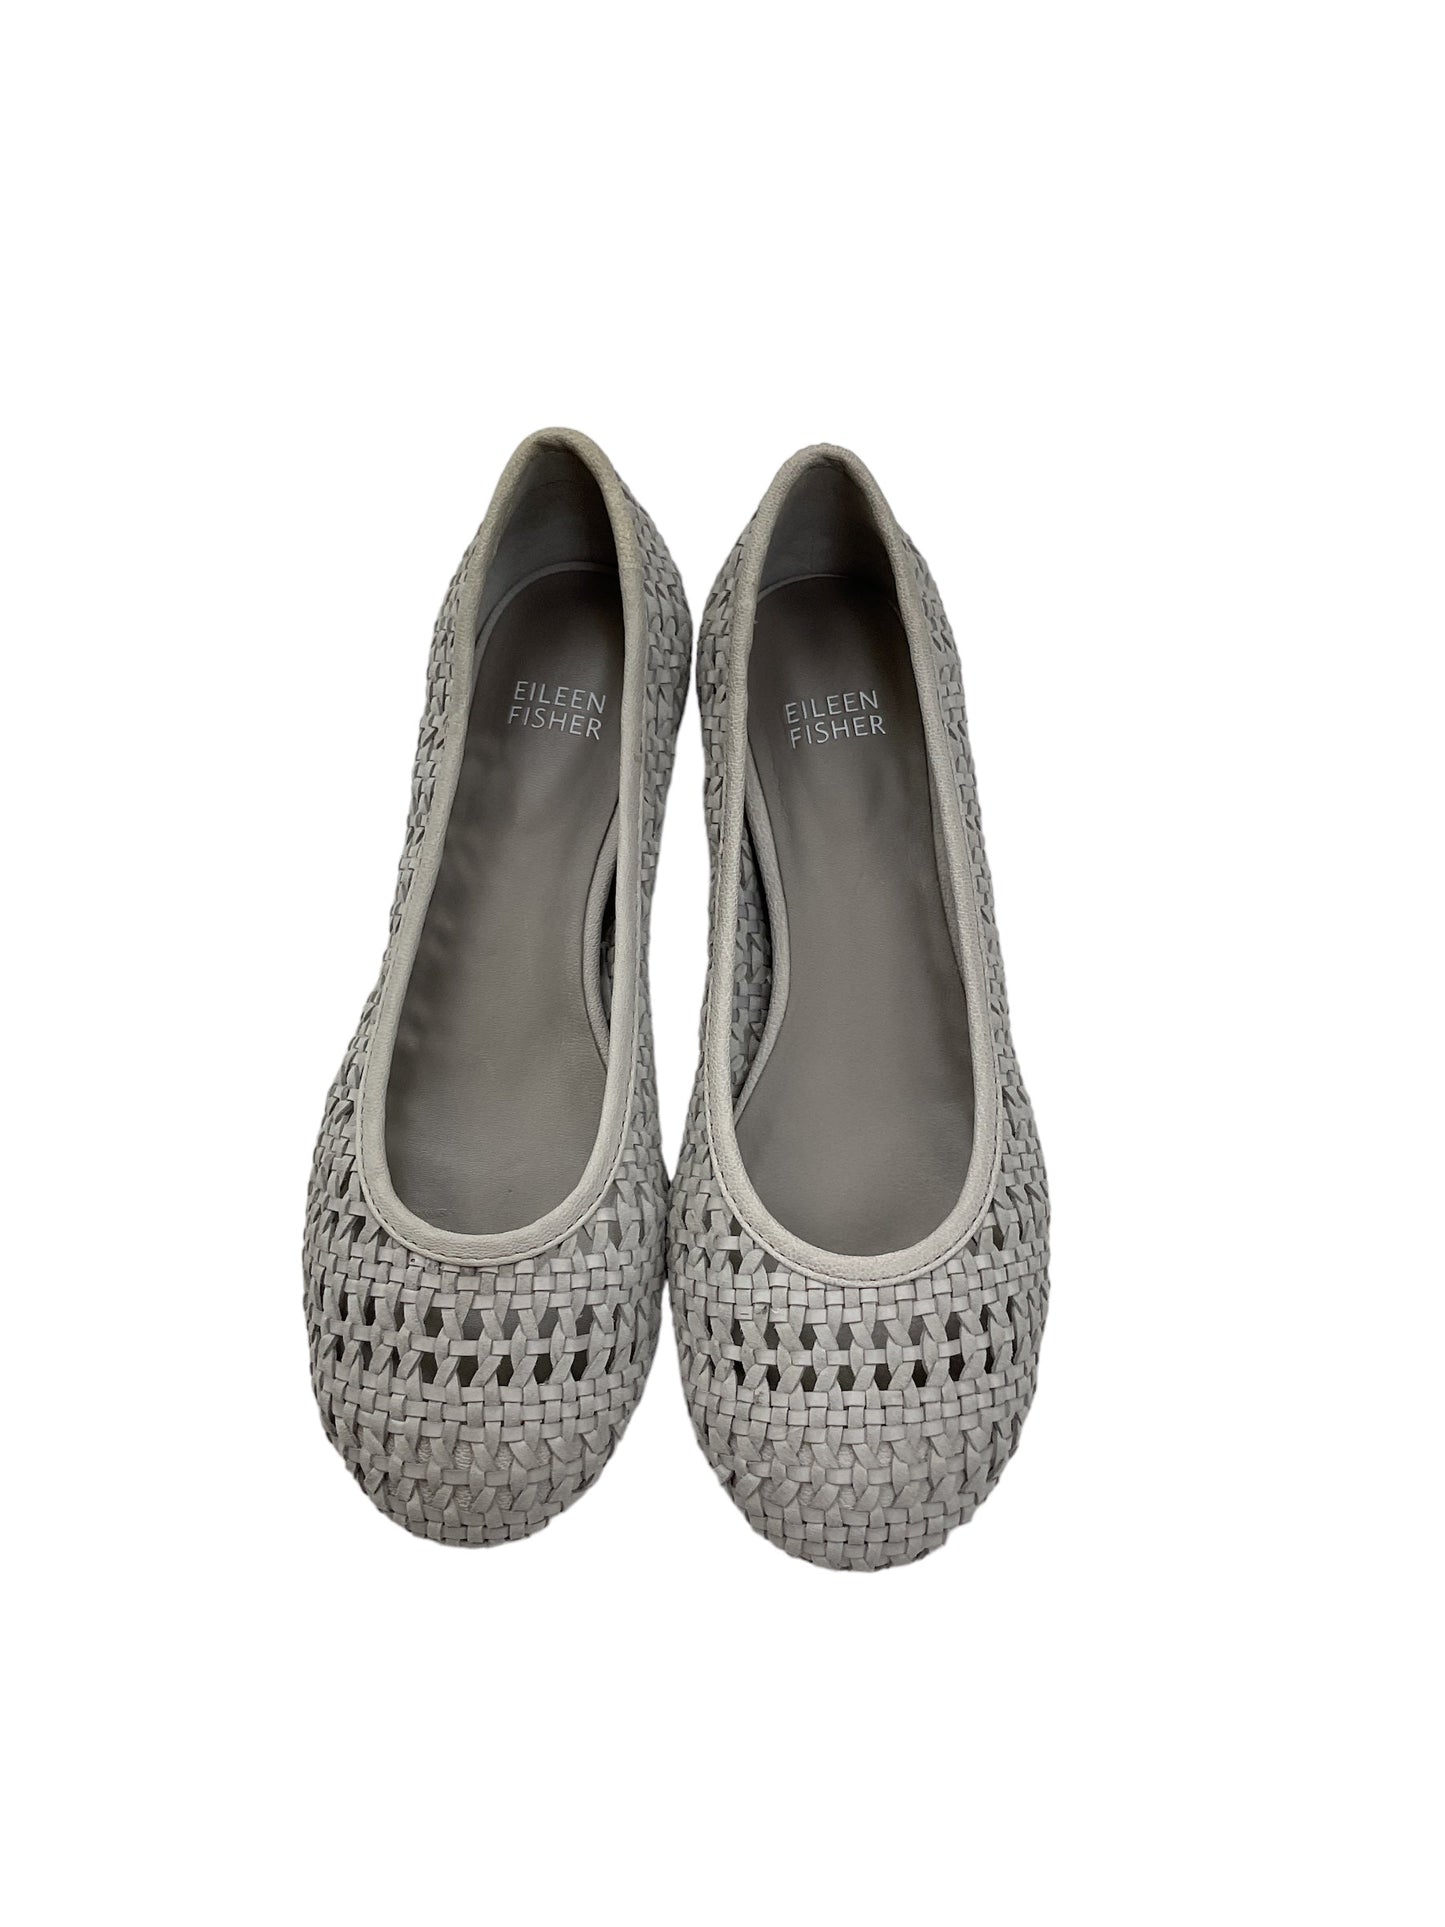 Grey Shoes Flats Eileen Fisher, Size 7